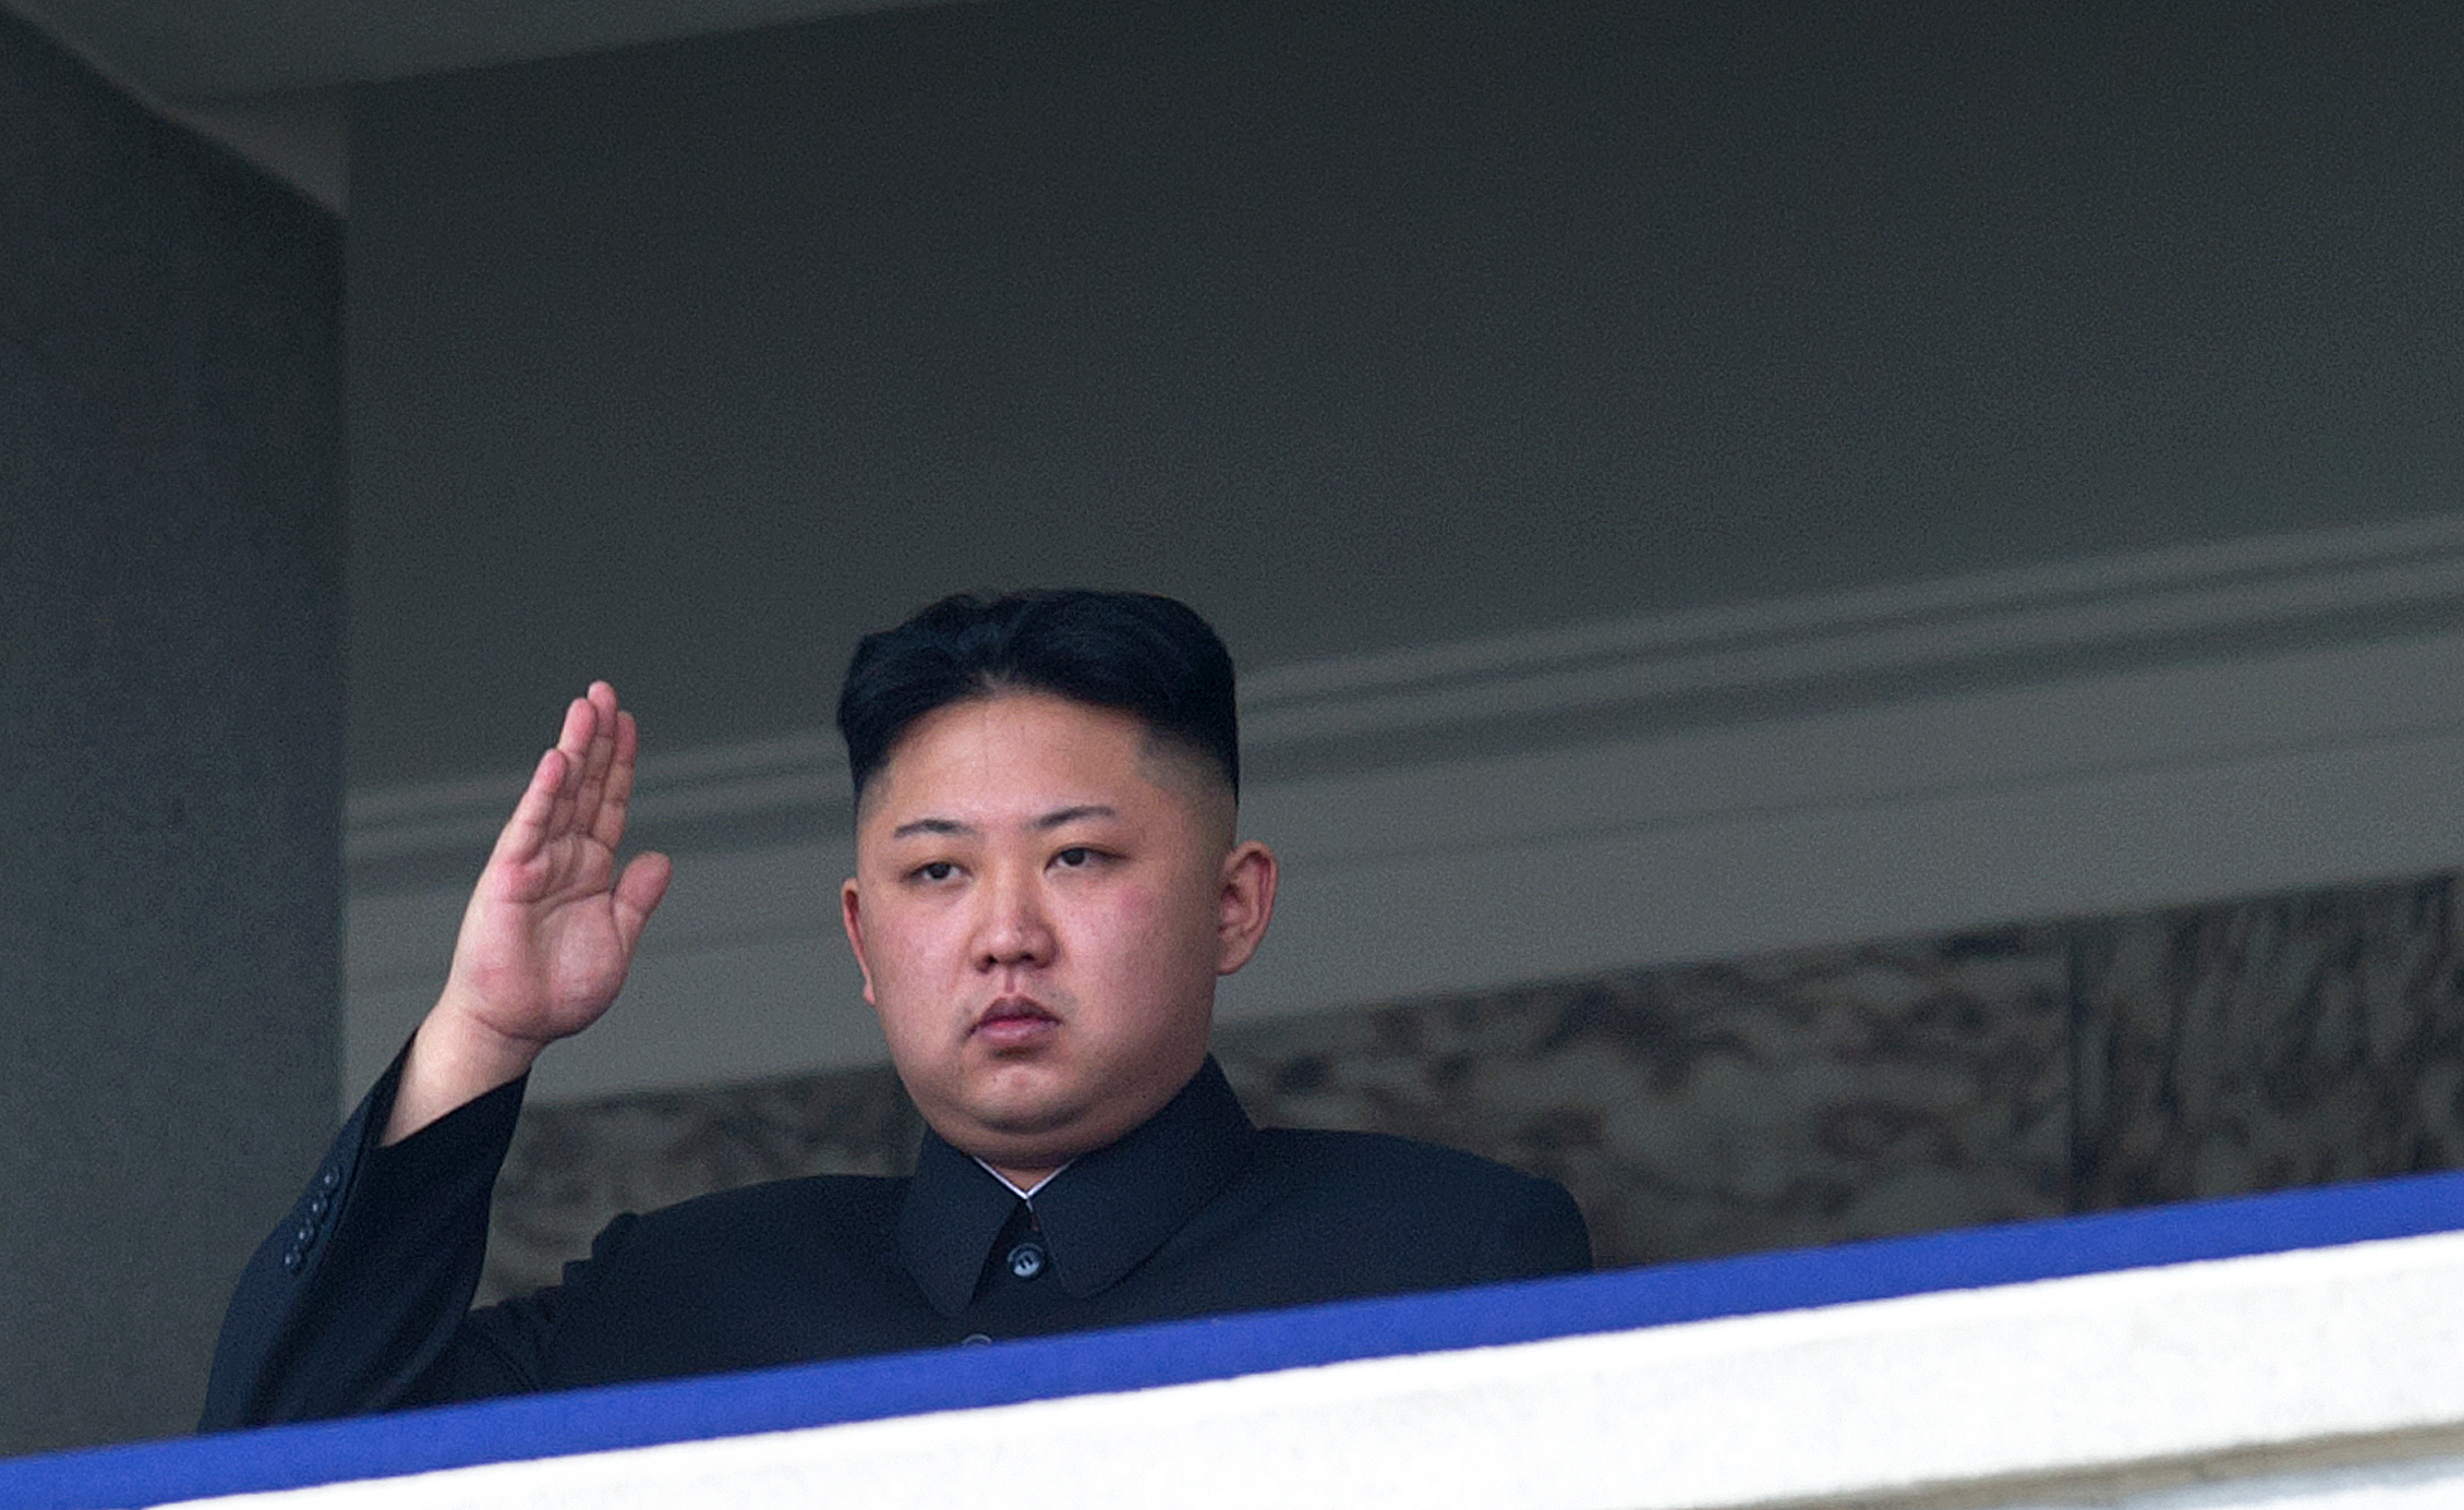 North Korean leader Kim Jong-Un saluting as he watches a military parade in Pyongyang on April 15, 2012 . (Ed Jones—AFP/Getty Images)